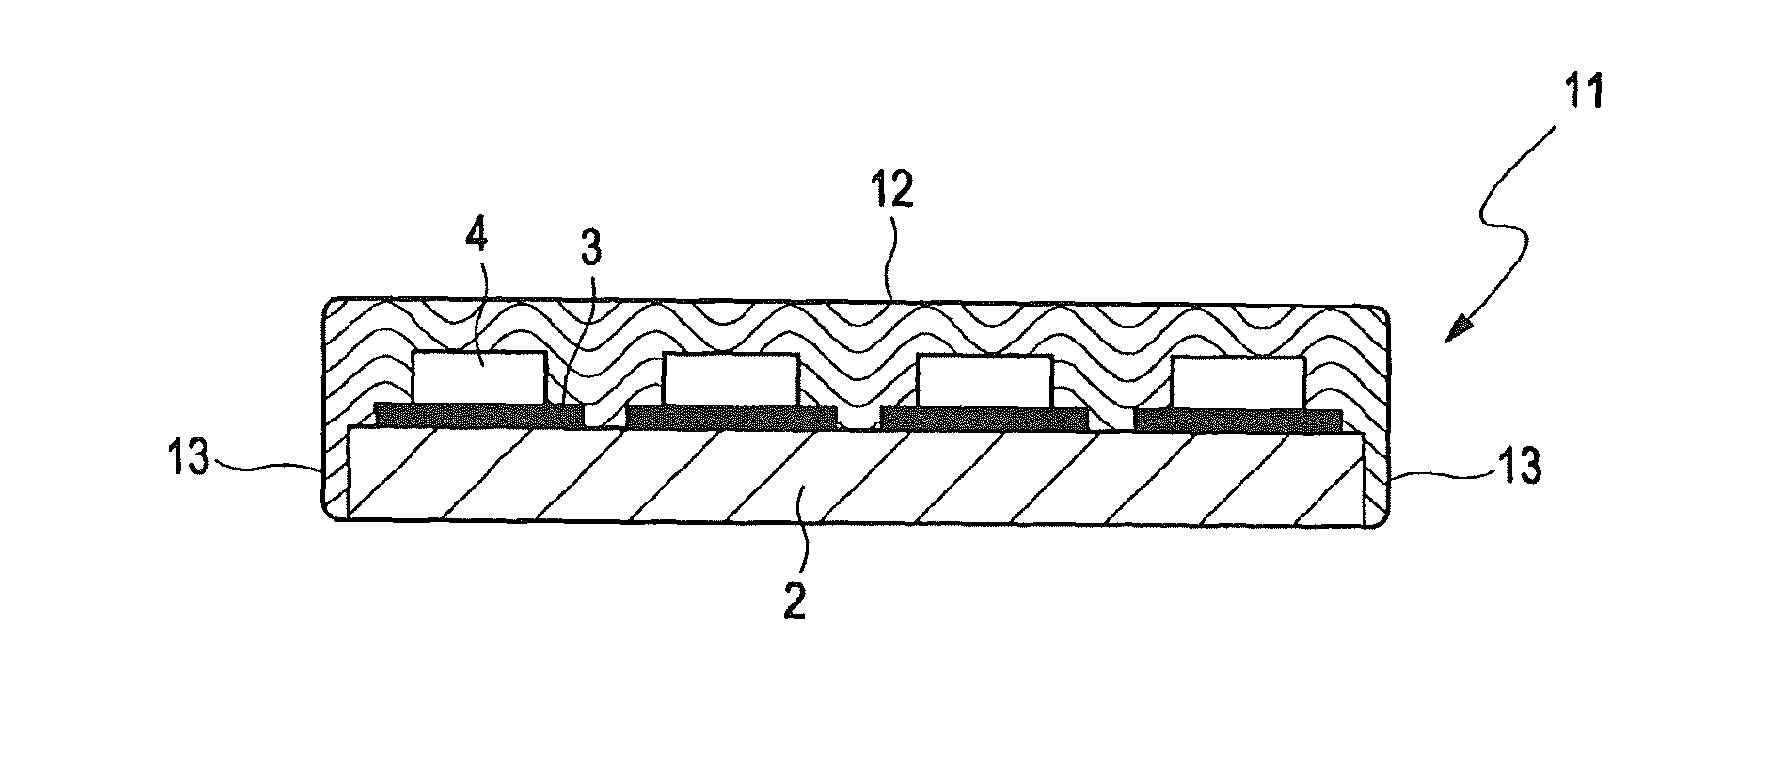 Coating Method for an Optoelectronic Chip-on-Board Module